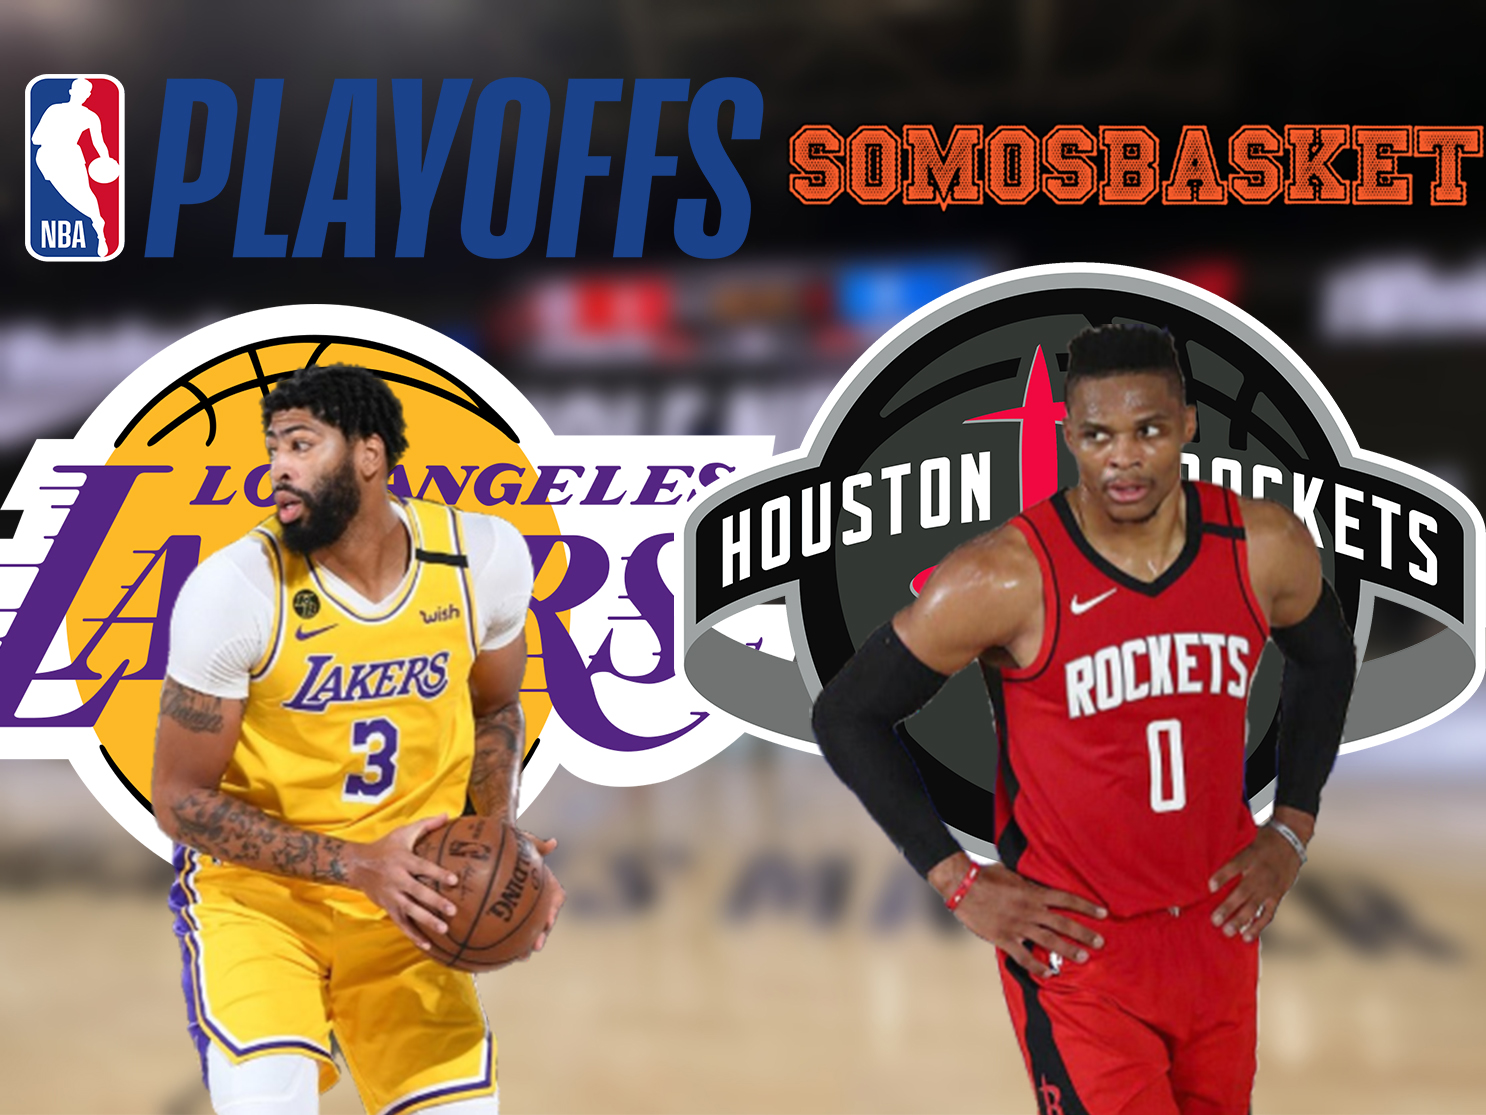 Previa Playoffs 2019-20 | Los Ángeles Lakers – Houston Rockets